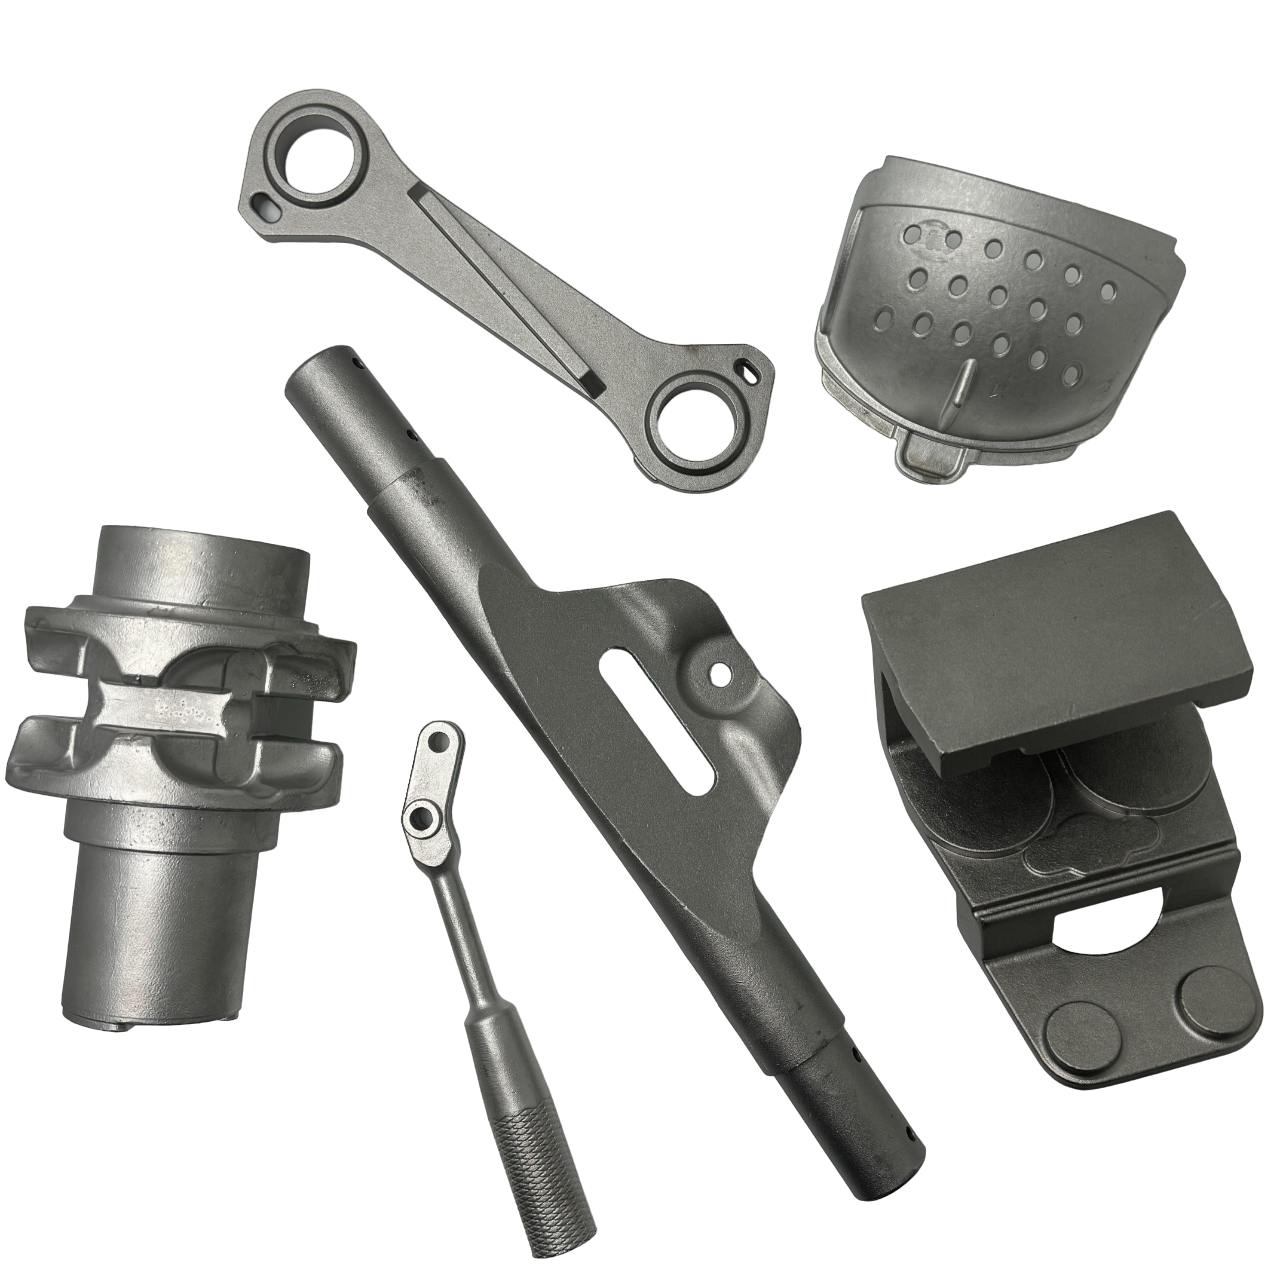 Understanding Gravity Die Casting: Process and Advantages